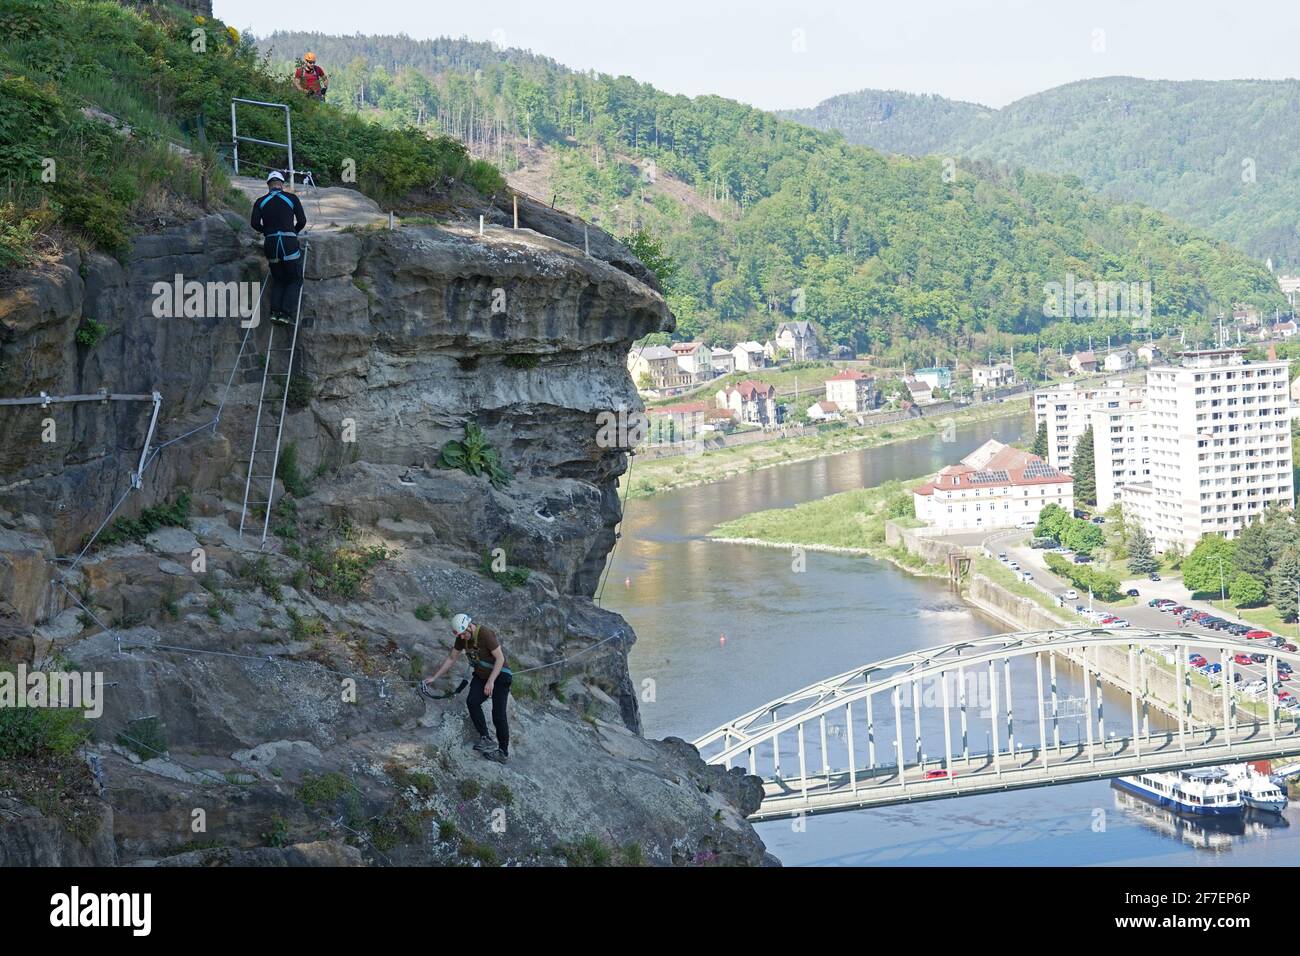 Decin, Czech Republic - May 7 2020: Two men friends climbing popular steep via ferrata route above river with harness and safety helmet, summer outdoo Stock Photo